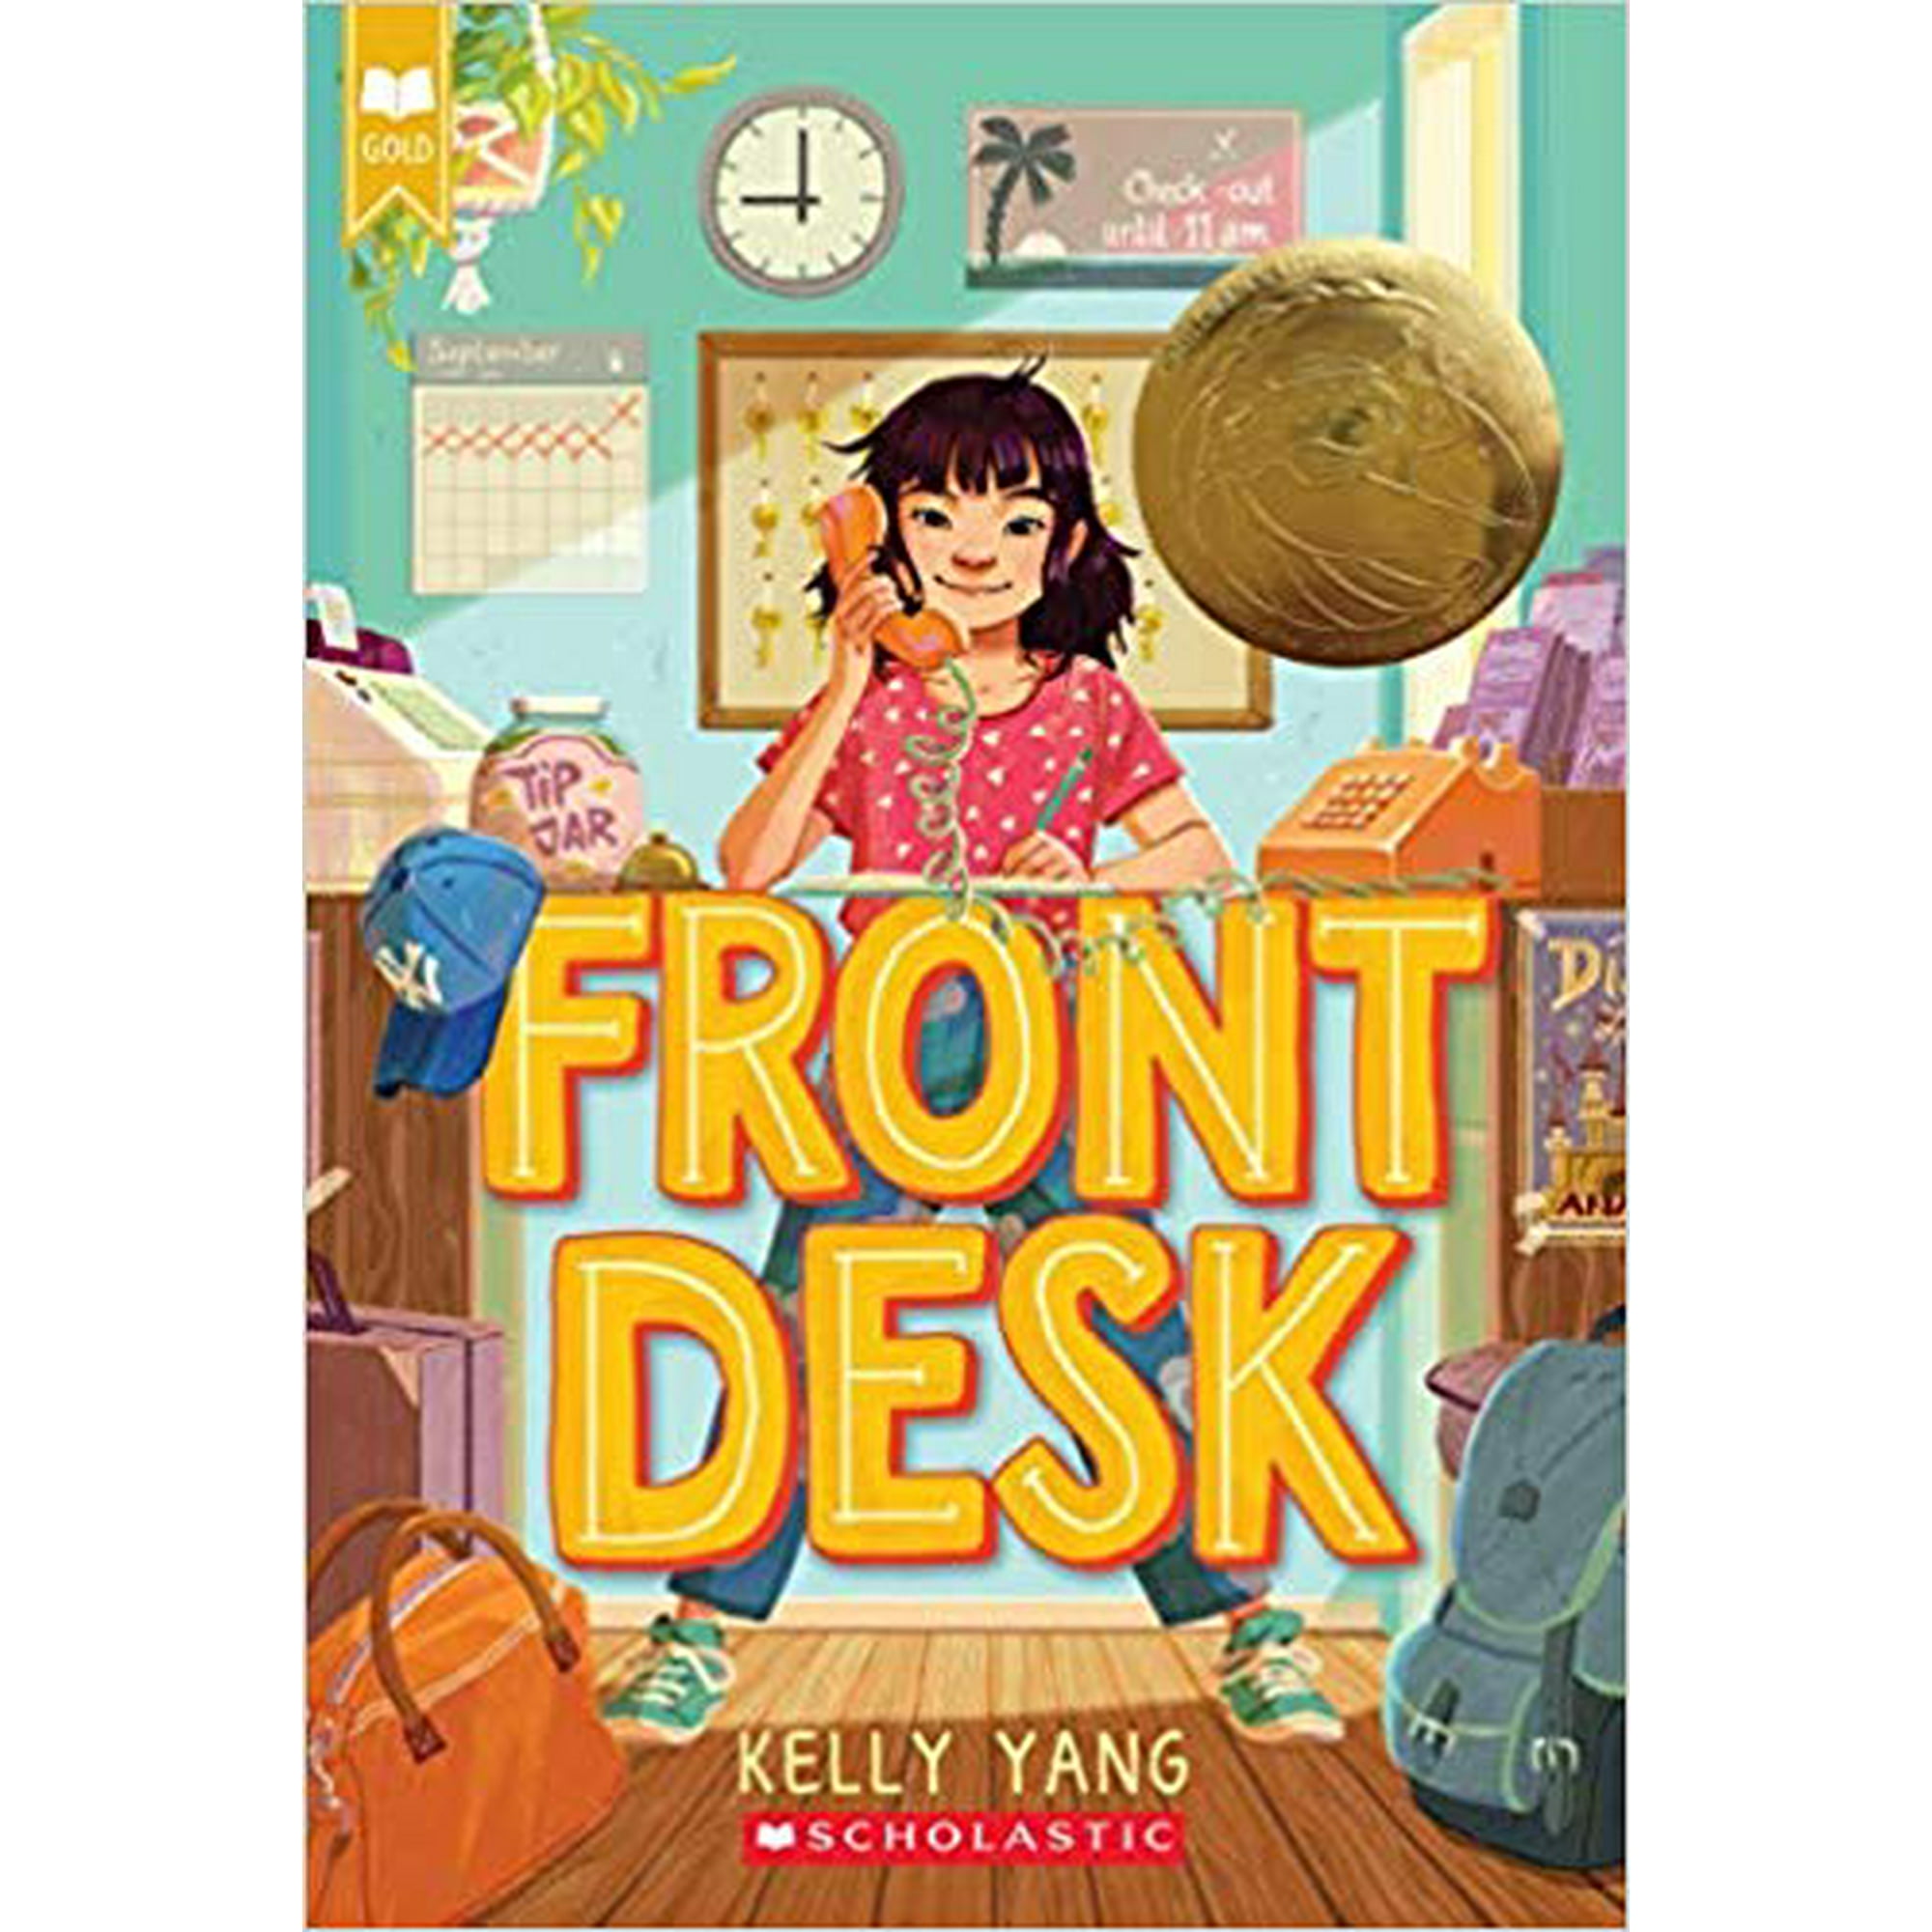 Front Desk (Scholastic Gold) by Kelly Yang PAPERBACK 2019 | Walmart Canada